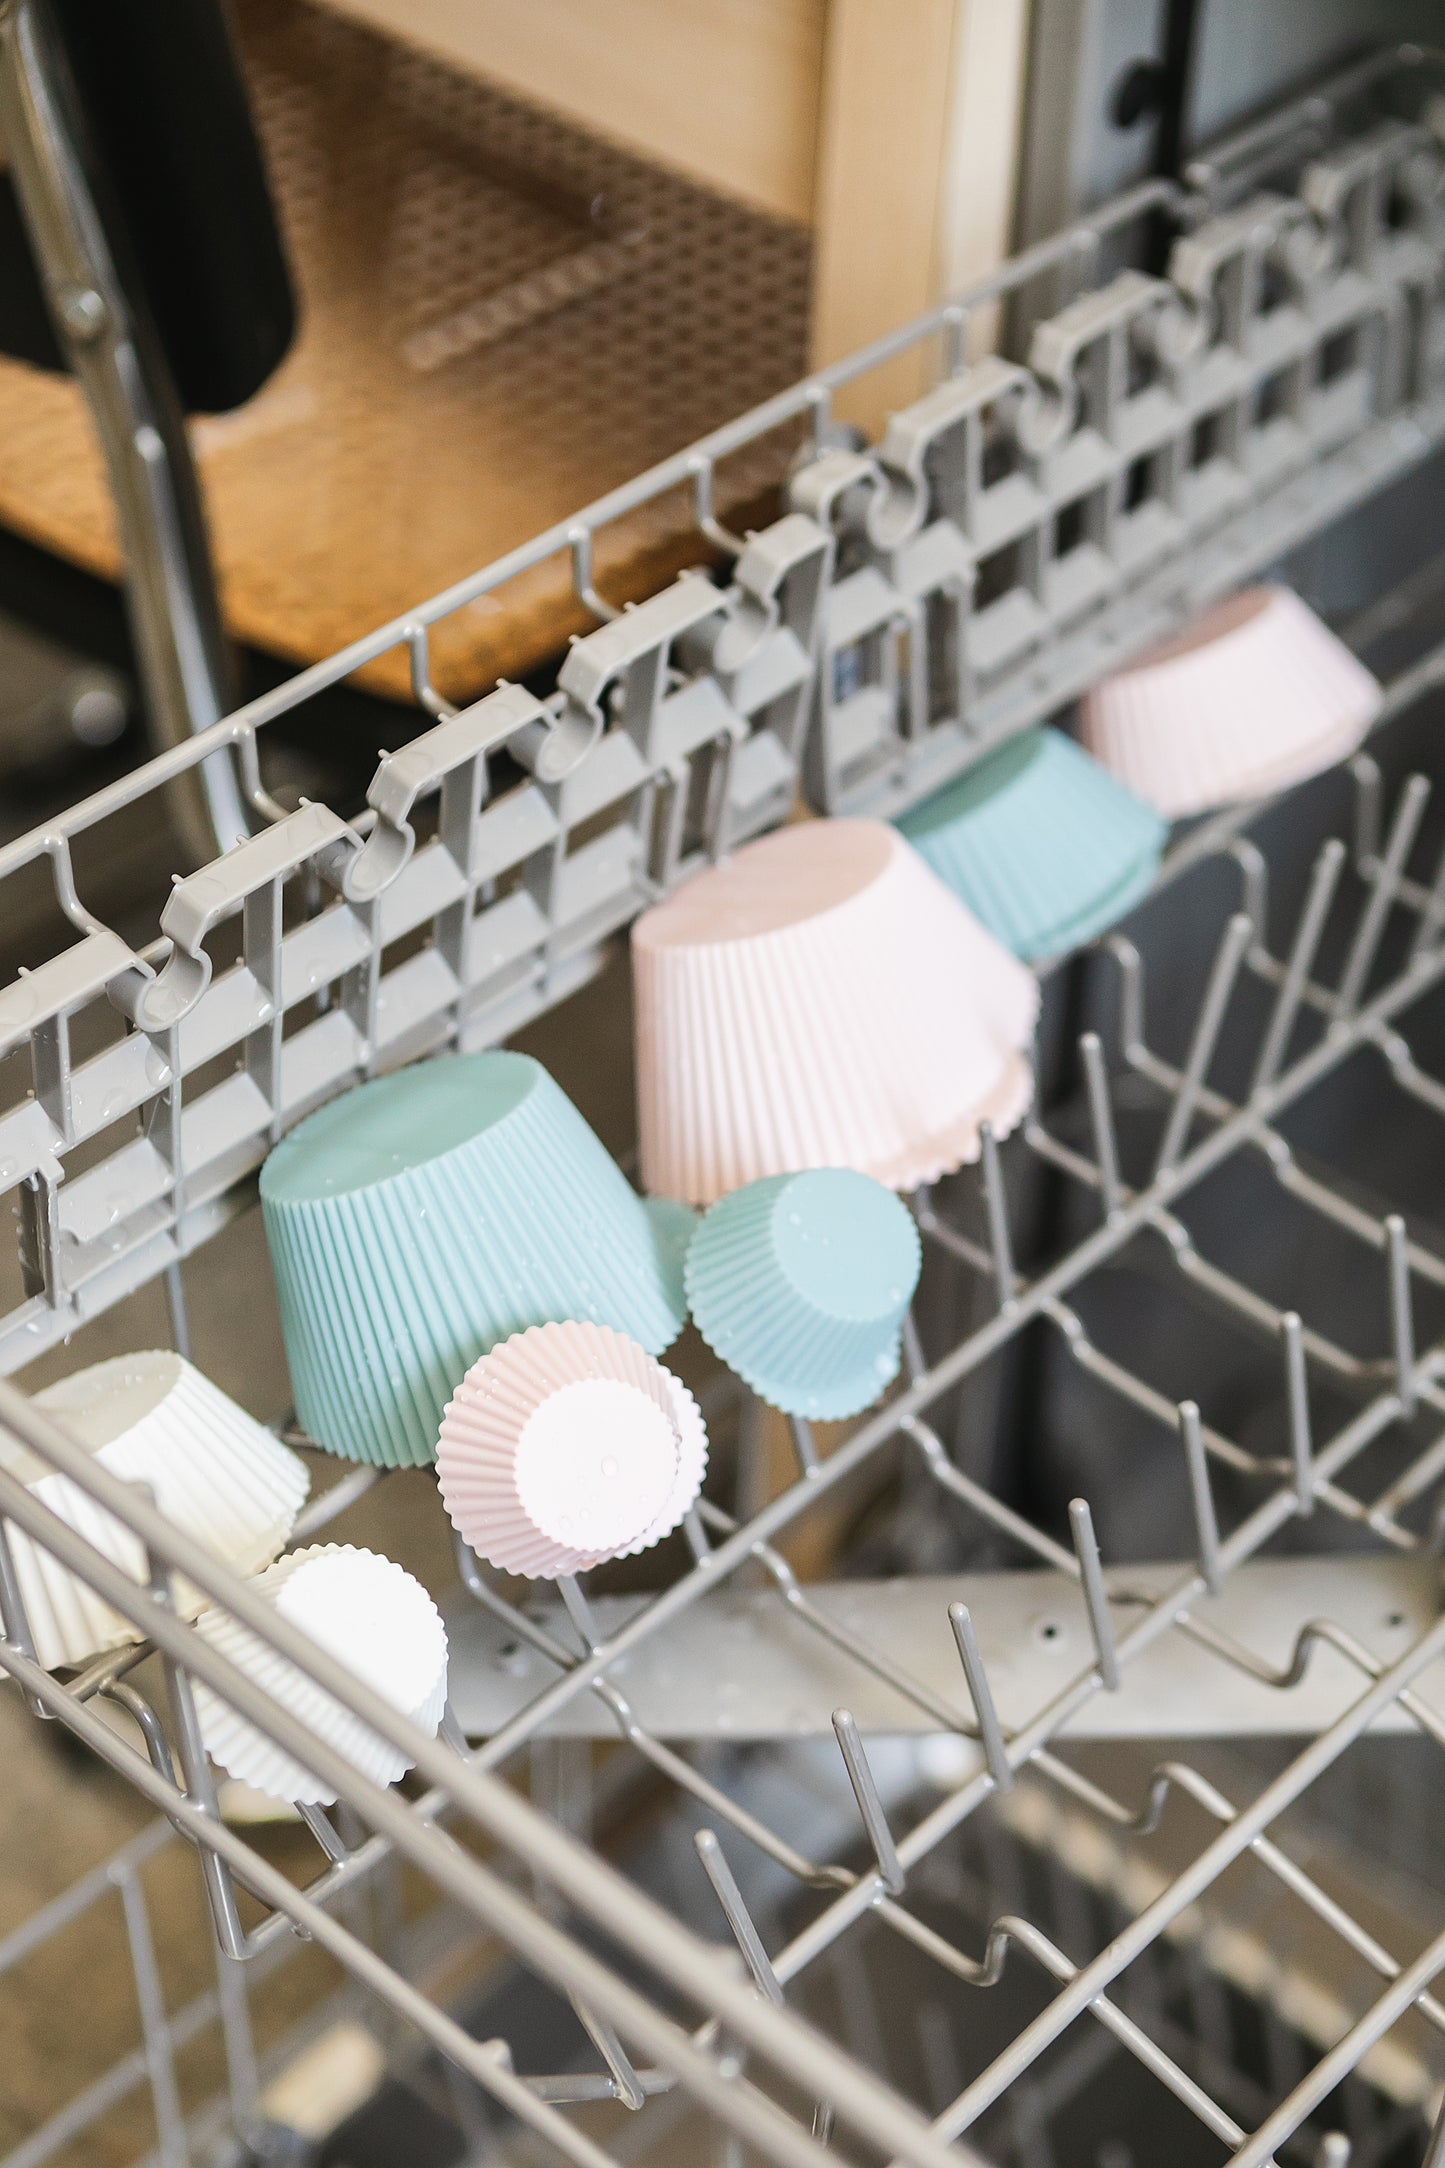 Silicone Baking Cups | Dusty Rose & Blue | Regular